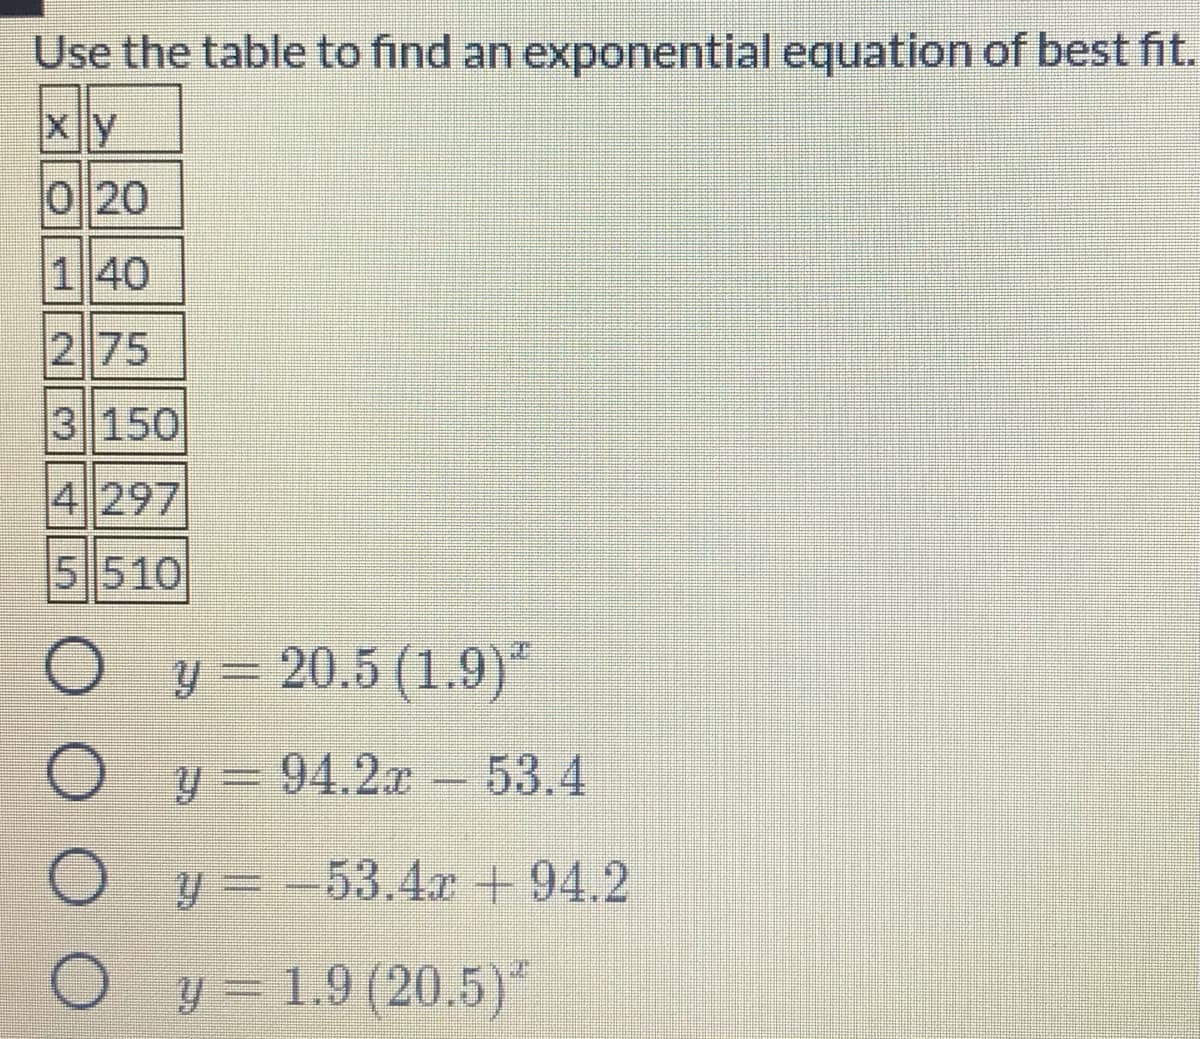 Use the table to find an exponential equation of best fit.
0 20
1 40
2 75
3150
4 297
5510
20.5 (1.9)
O y- 94.2 - 53.4
y = -53.4x +94.2
O y= 1.9 (20.5)"
